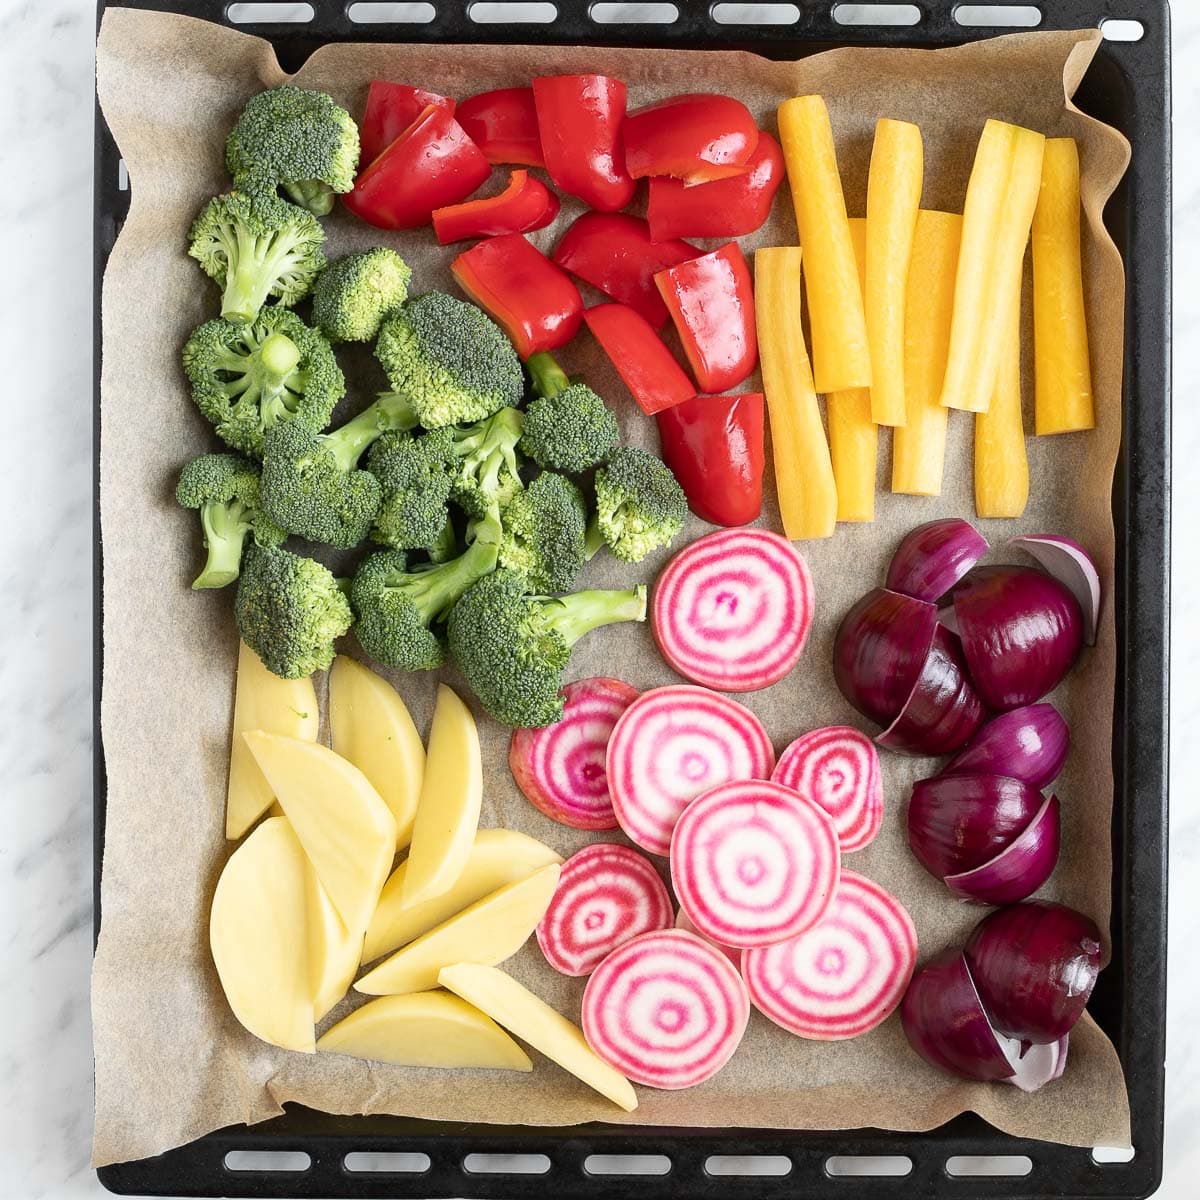 A large black sheet pan covered with parchment pepper with raw veggies like red bell pepper, broccoli, pink beet, potatoes, yellow carrot, red onion and green pesto sauce.